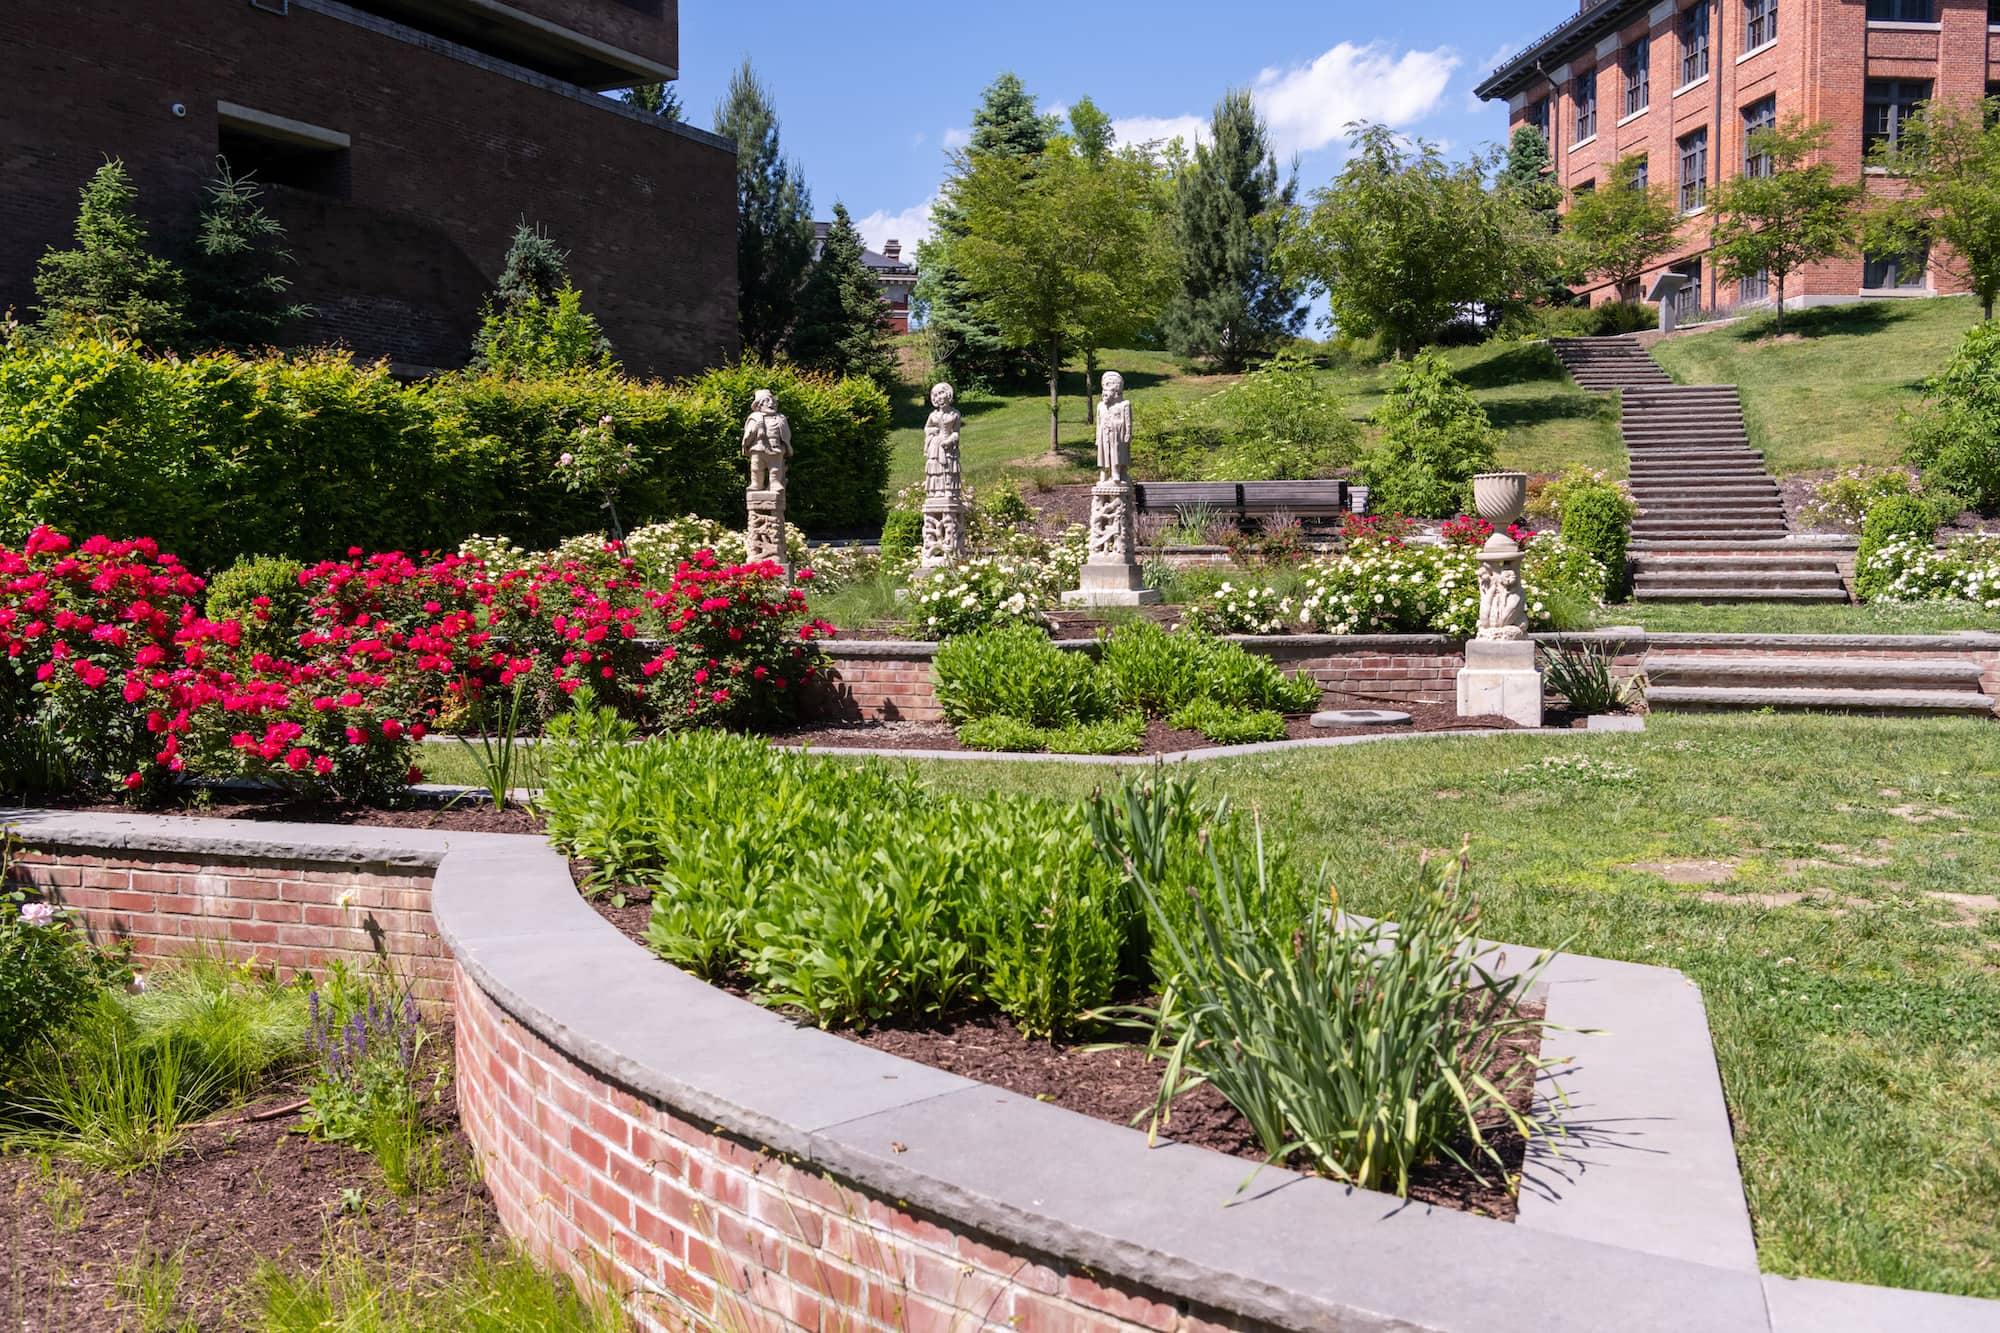 A large, open garden area with several stone statues and brick buildings in the background.